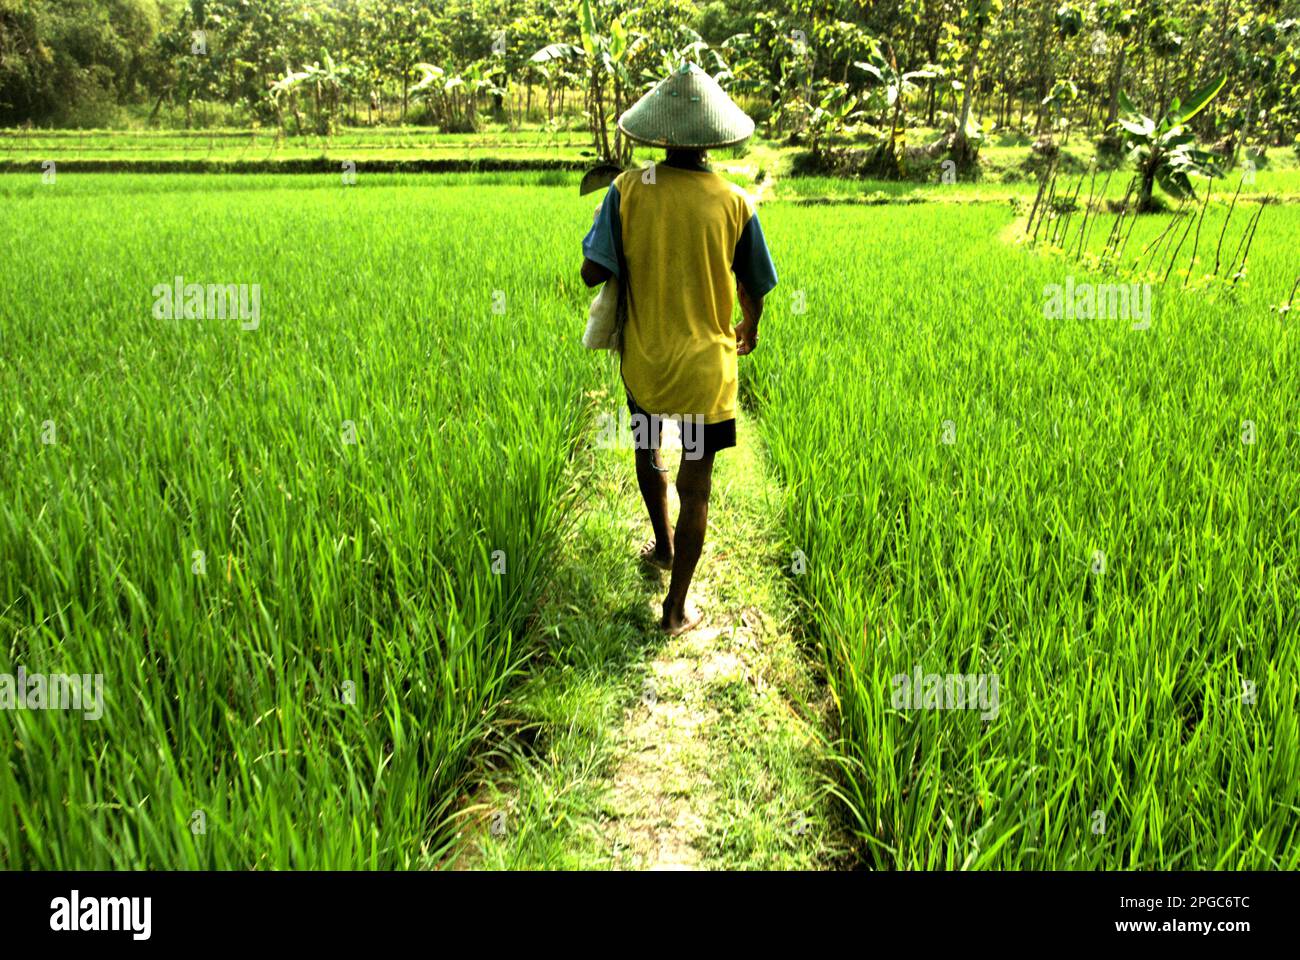 A farmer walks on a dike through rice terraces as he is in daily duty of collecting grass to feed livestock in Kradenan, Blora, Central Java, Indonesia. Climate change will increasingly expose outdoor workers to heat stress and reducing labour capacity, according to the 2023 report published by the Intergovernmental Panel on Climate Change (IPCC), entitled 'Climate Change 2022: Impacts, Adaptation and Vulnerability'. The report suggests that climate change adaptation options are needed to protect agricultural worker productivity outdoors and reduce occupational heat illnesses and deaths. Stock Photo